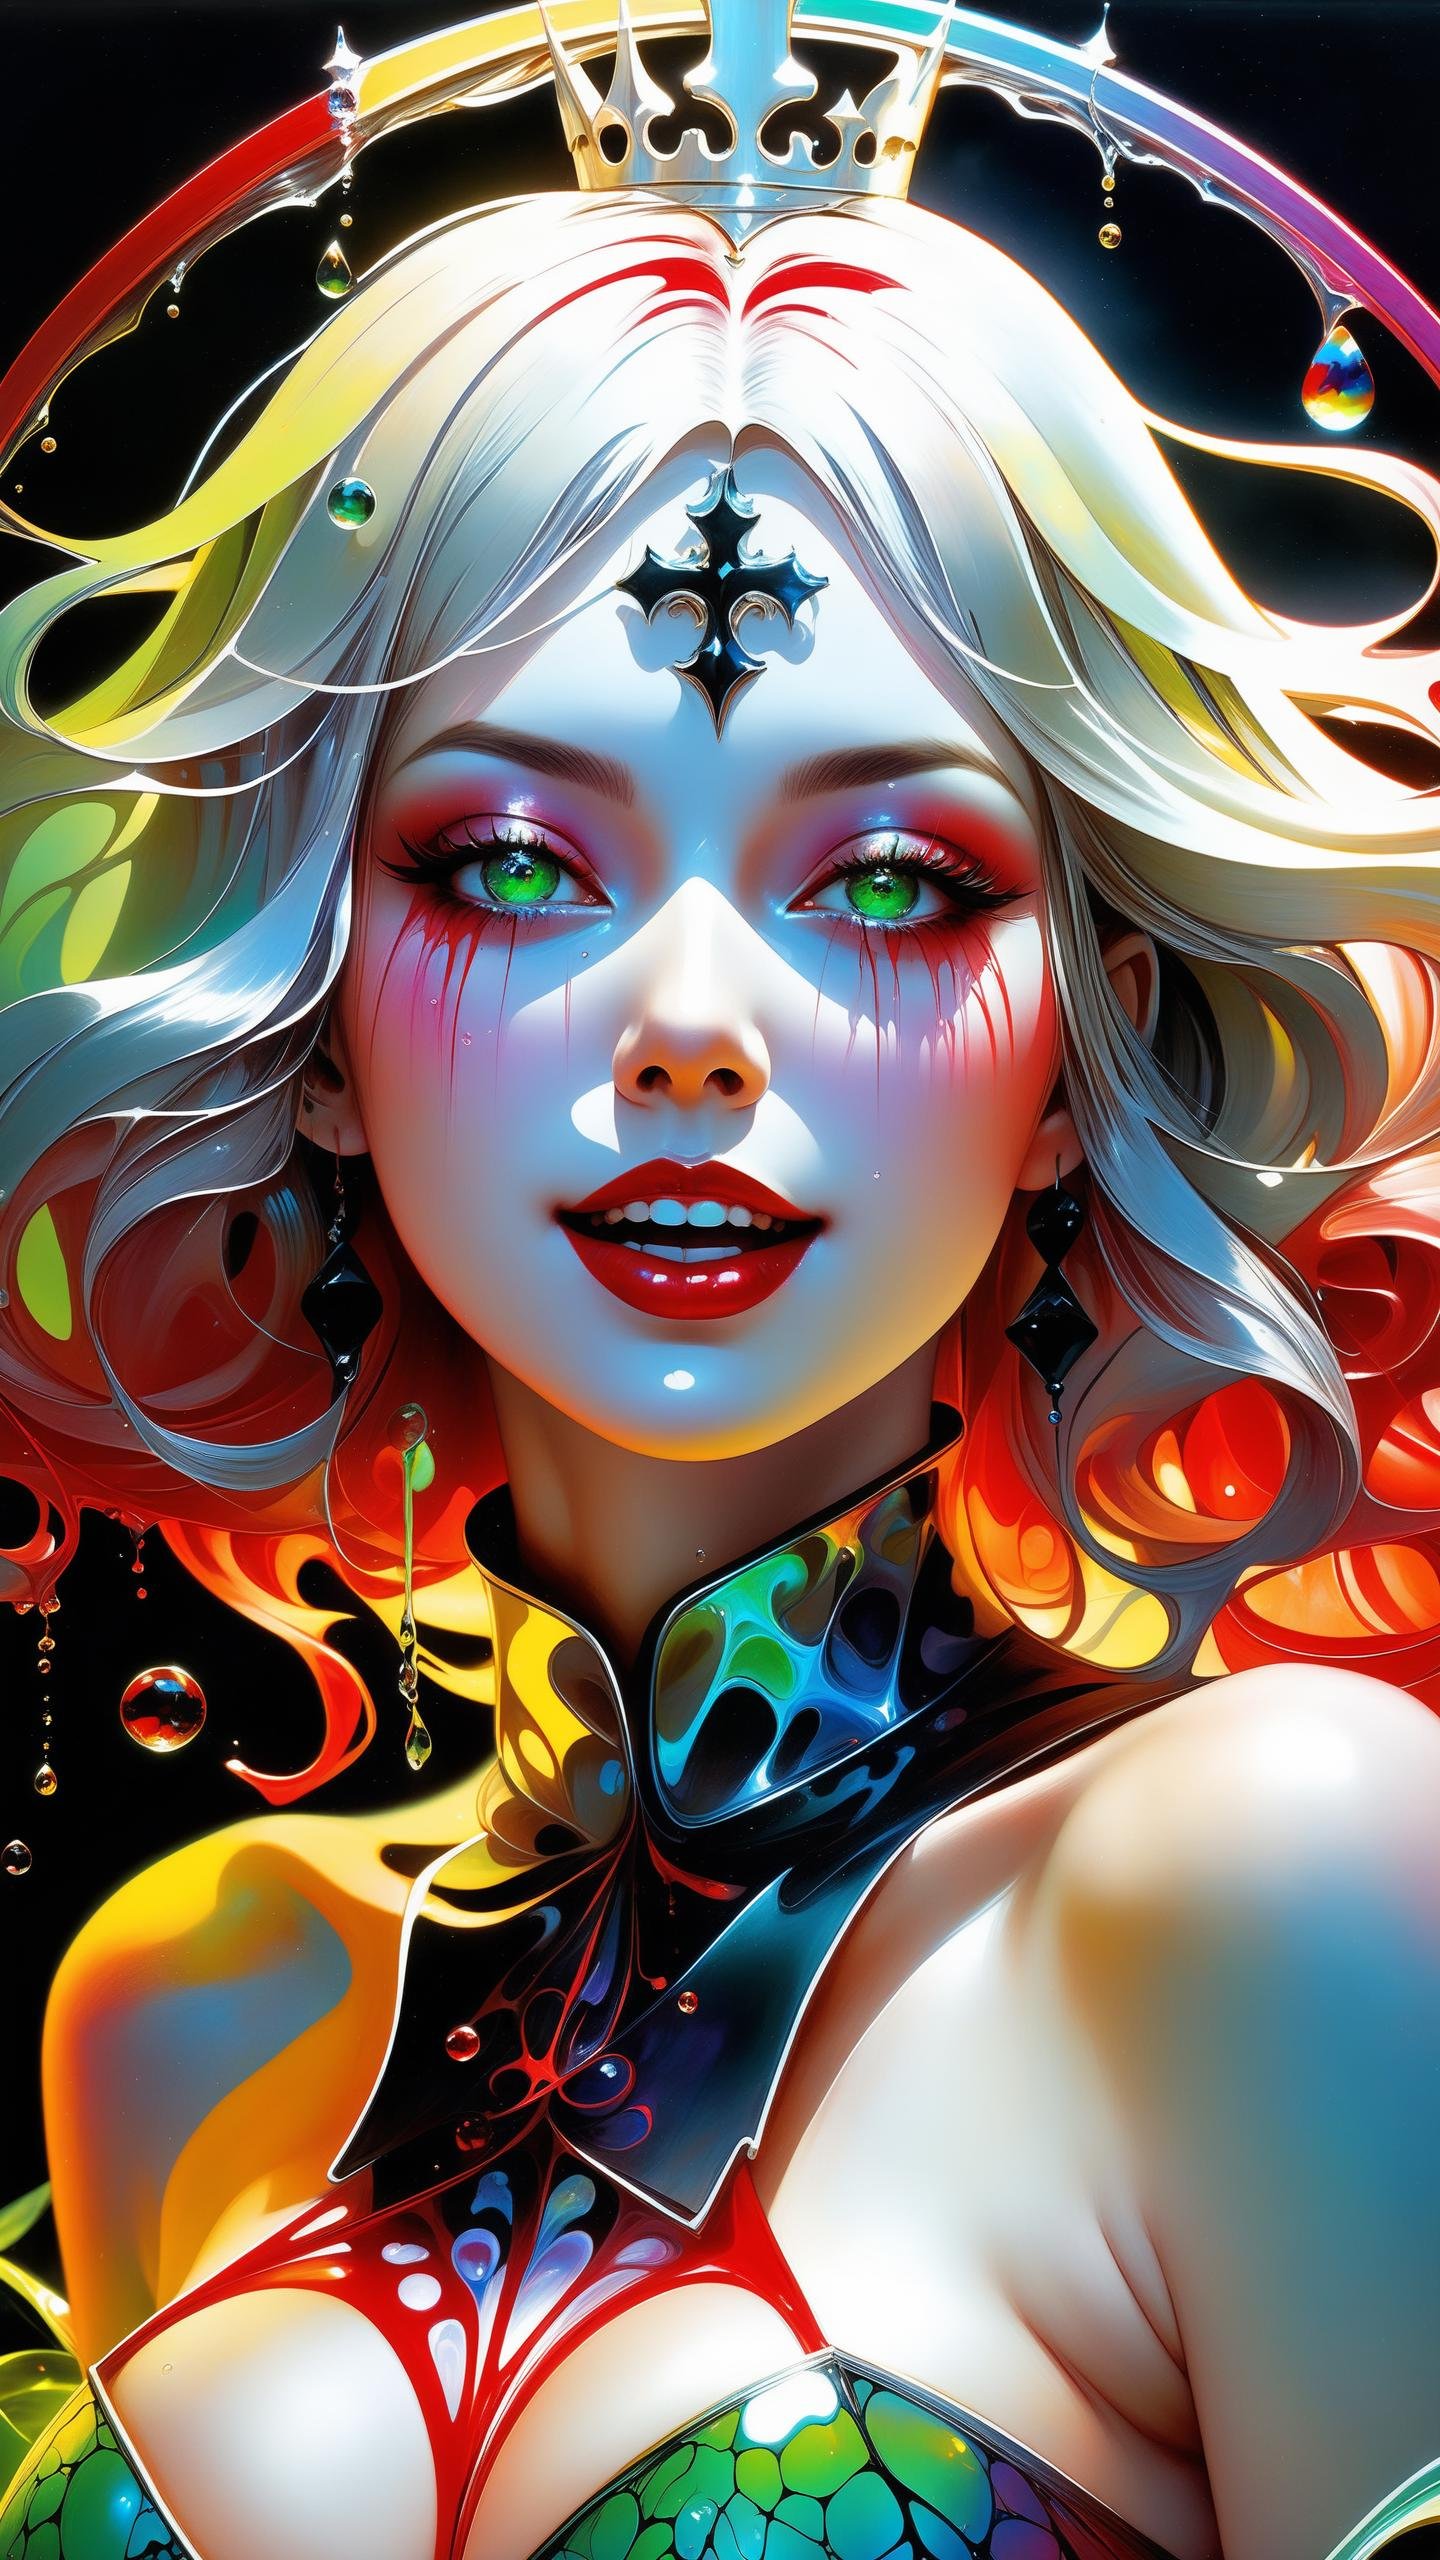 a Girl, laughing, Colorful colors, surrounded by water bubbles, in the style of Kawacy, Masterpiece, Oil painting drawn in anime style, head close - up, exaggerated perspective, Tyndall effect, water drops, mother - of - pearl iridescence, Holographic white, chess queen outfit, anime girl, girl with a pretty face, white gold hair, green eyes, goth girl, ((sexy school uniform)), wearing a stylish very sexy school uniform, with a funny expression on her face, Hellwalker, incombing death, black bloody veins growing and intertwining out of the darkness, oozing thick yellow blood, veins growing and pumping blood, (chubby female body:0.8), vascular networks growing, connecting, explanding, red veins everywhere, zdzislaw beksinski, (sharp colors:1.3), (rainbow skin:1.1), (Infrared:1.2), ultra detailed, intricate, ((dry brush, ultra sharp)), (surrealism:1.4), (disturbing:1.5), beksinski style painting, satanic symbols, (full torso), full body in frame, centered body, kawaii, realistic, ((intricate details)), (pale gothic evil queen), ibrant, action-packed, detailed character design, reminiscent of fighting video games, black bloody veins growing and intertwining out of the darkness, oozing thick neon rainbow blood, veins growing and pumping blood, vascular networks growing, connecting, explanding, red veins everywhere, zdzislaw beksinski, (vibrant colors:1.1), dynamic pose, perfect face, (realistic eyes), perfect eyes, ((dark gothic background)), sharp focus